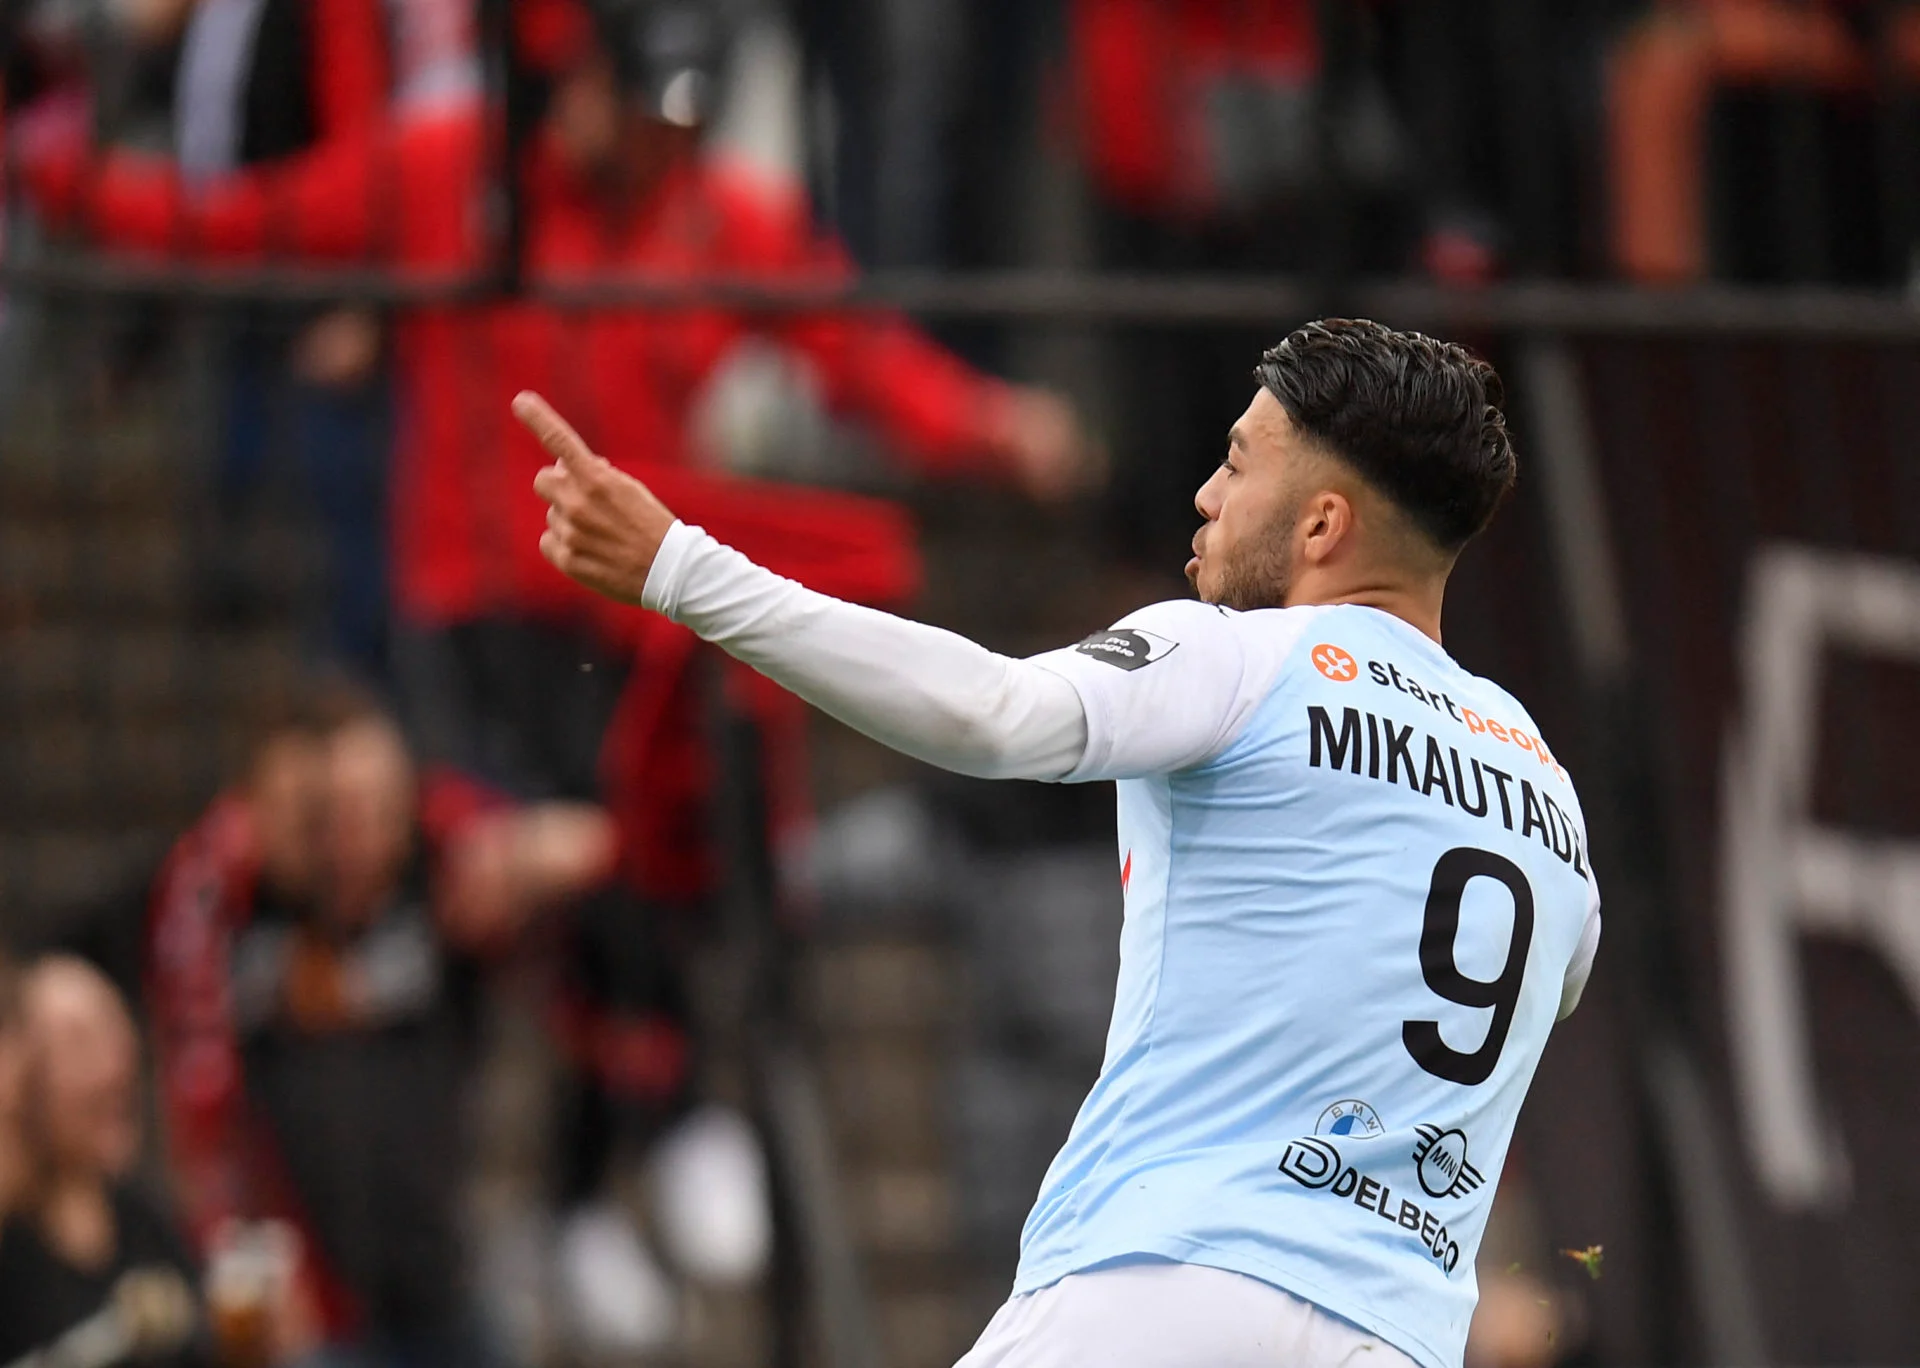 All interested clubs have the capacity to shell out the asking price set upon Georges Mikautadze, and so it remains just a matter of time before he moves.